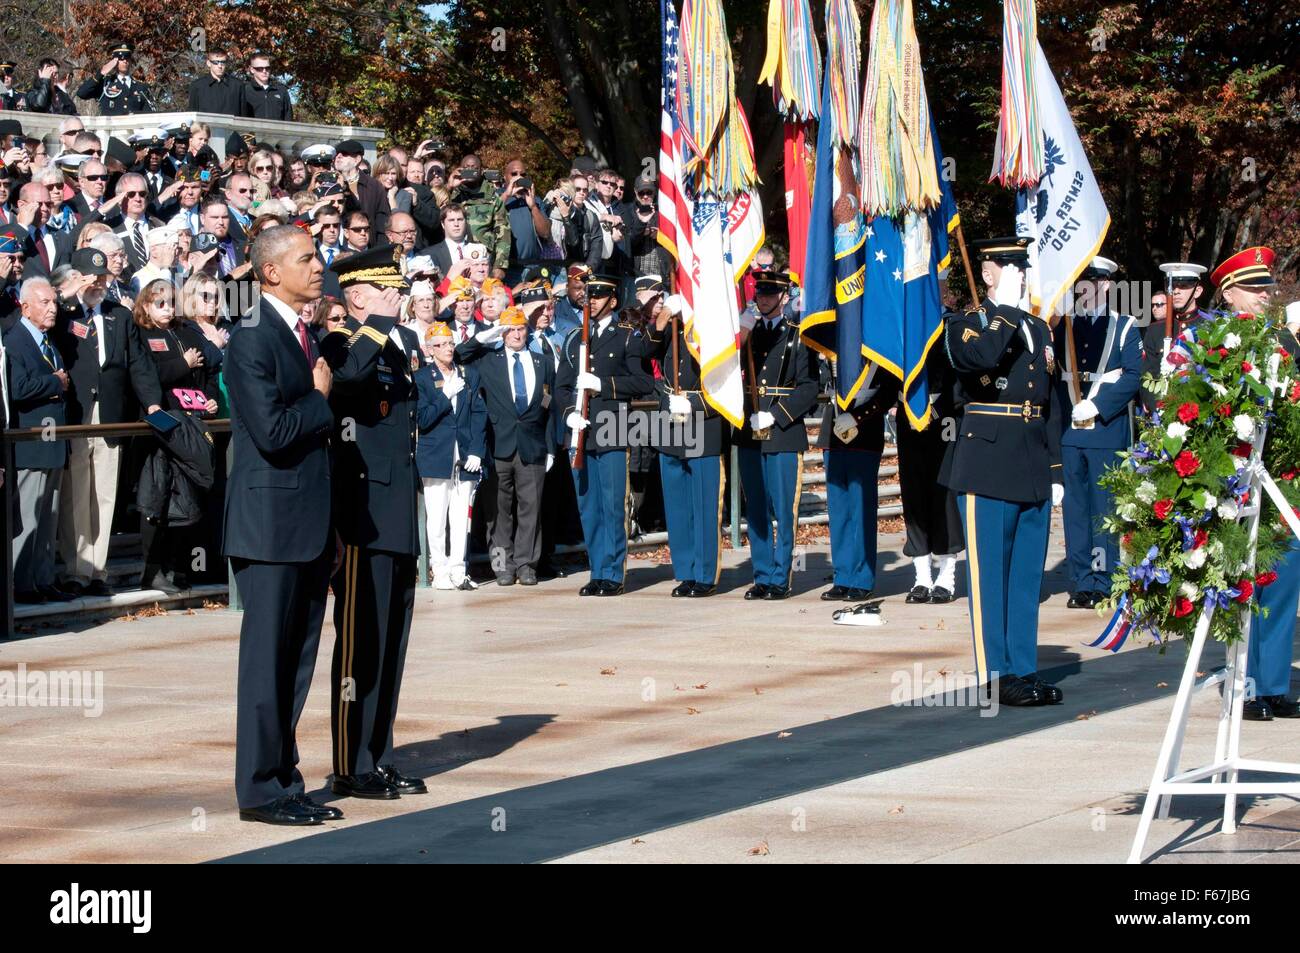 U.S. President Barack Obama with Major General Bradley Becker salutes during a wreath ceremony at the Tomb of the Unknowns in honor of Veterans Day at Arlington National Cemetery November 11, 2015 in Arlington, Virginia. Stock Photo